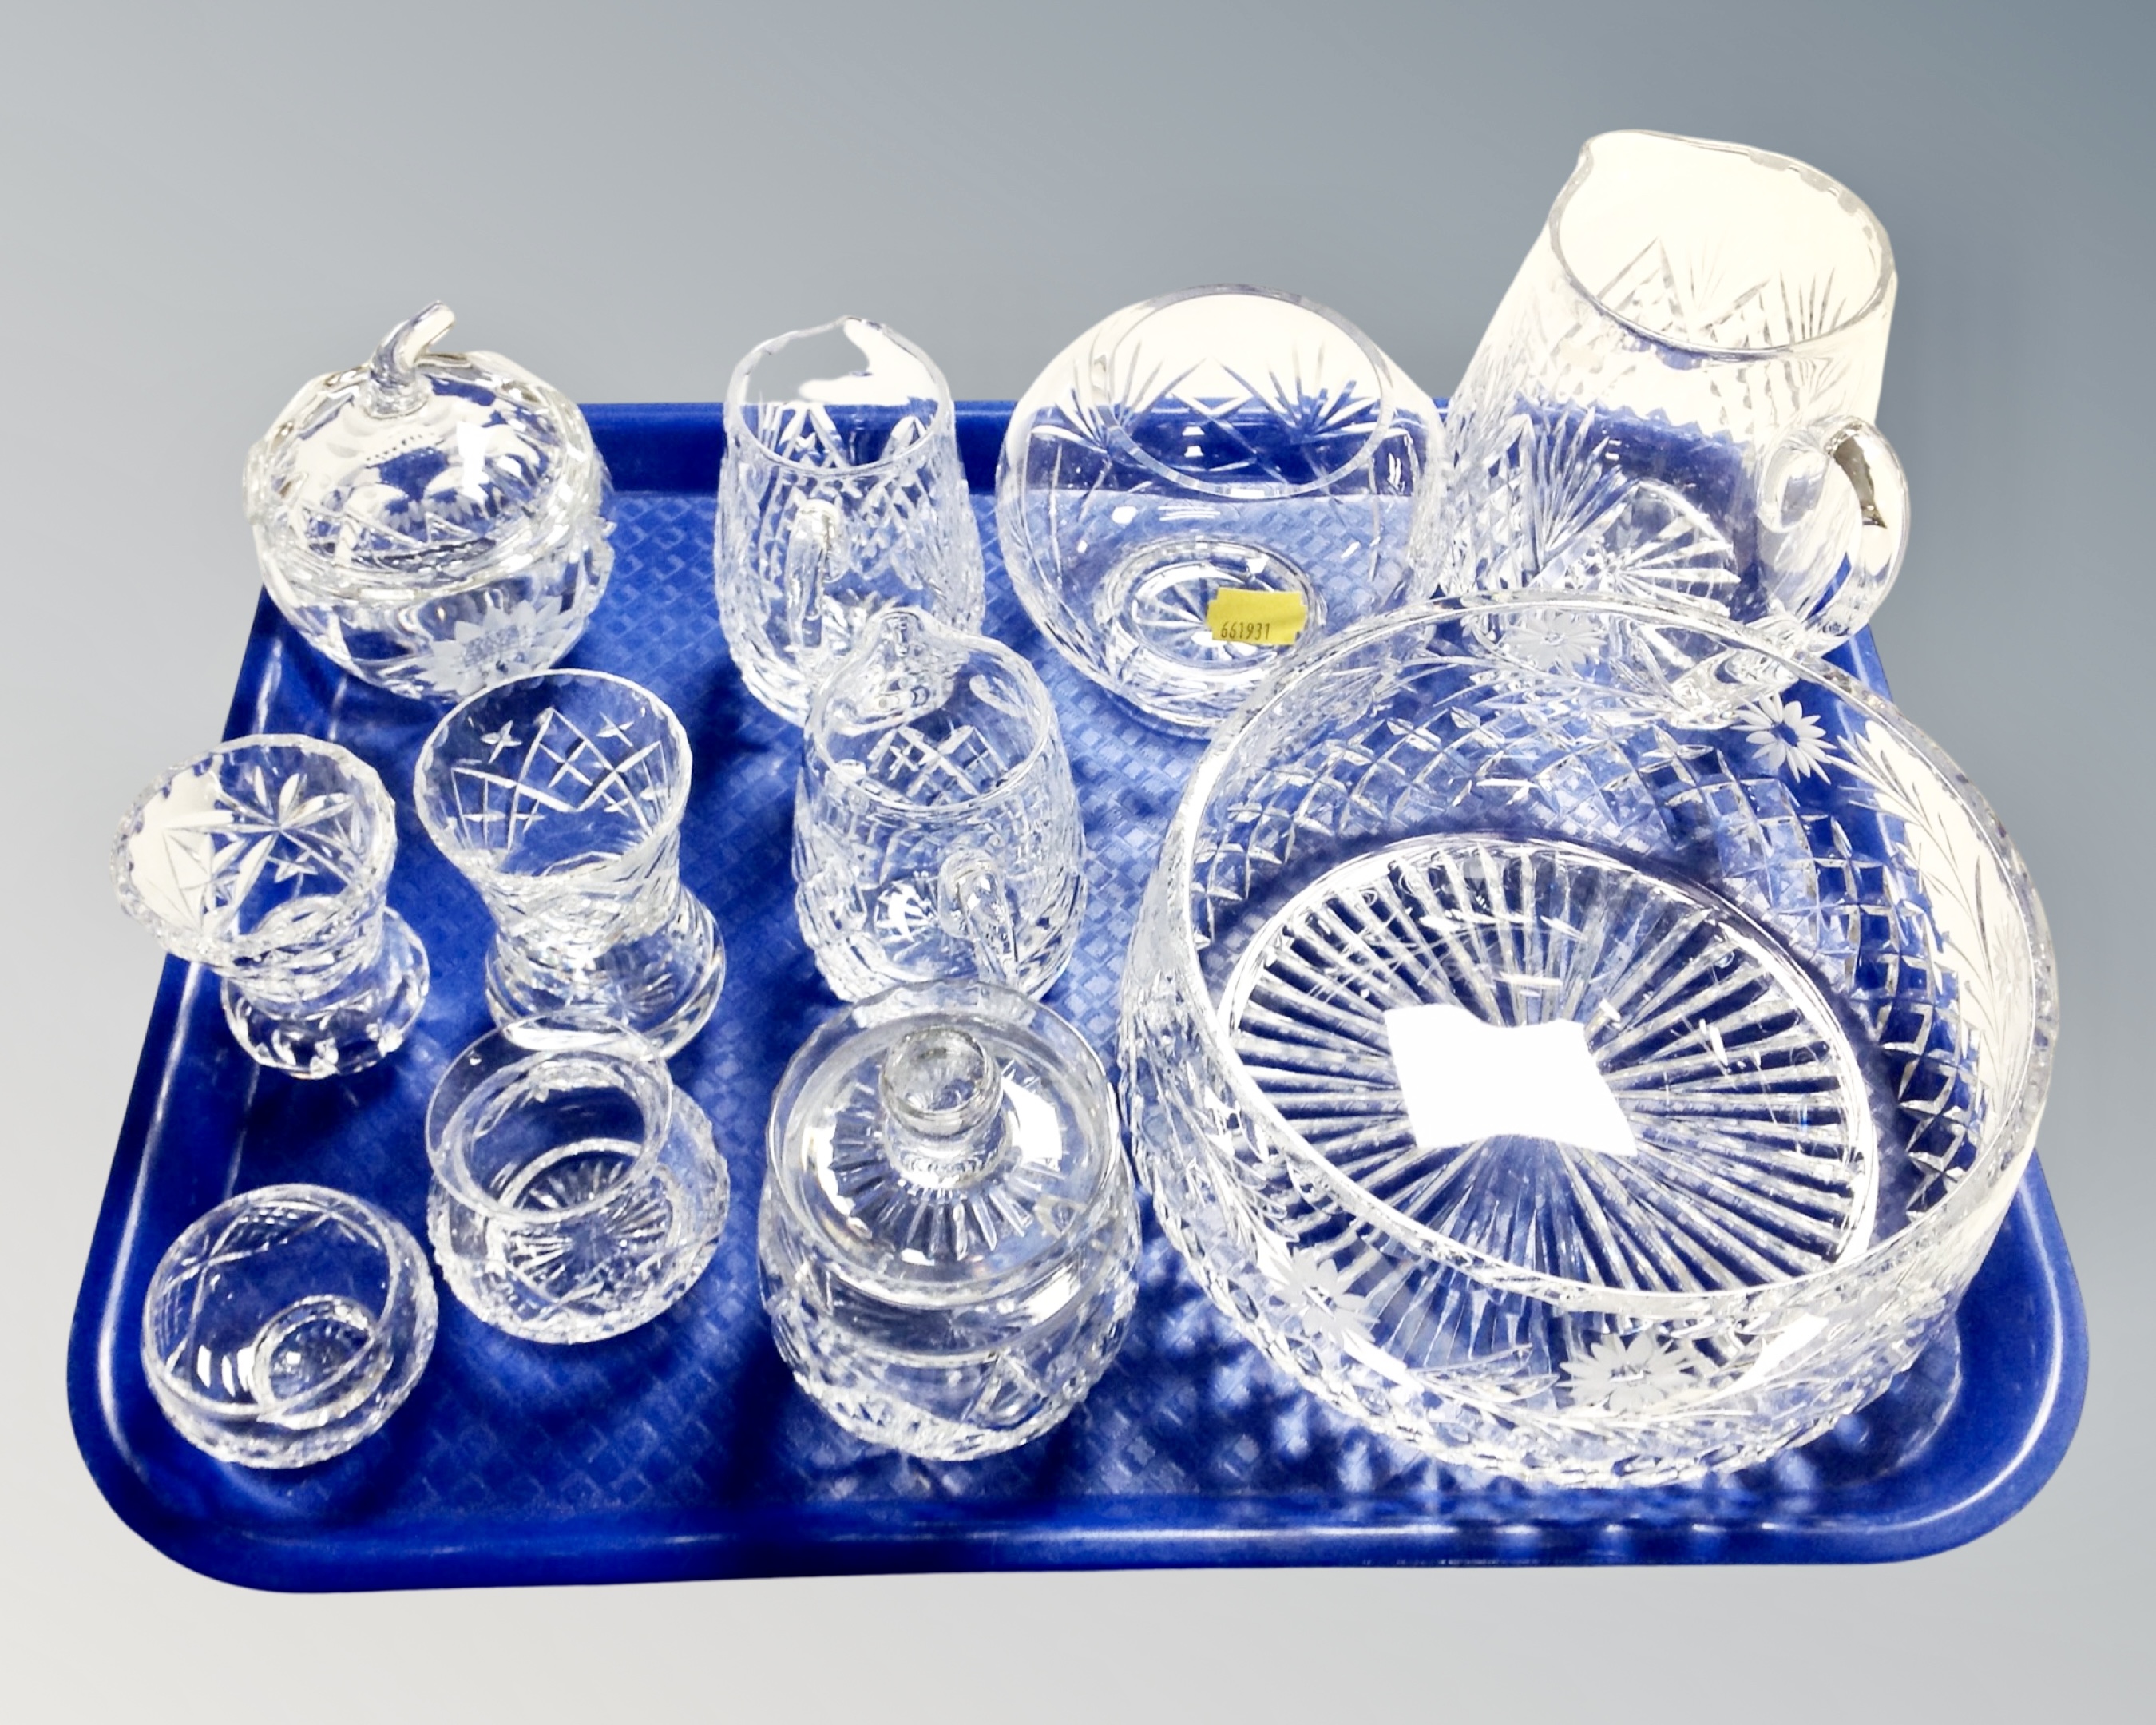 A tray containing a quantity of 11 pieces of good quality lead crystal including Royal Brierley,